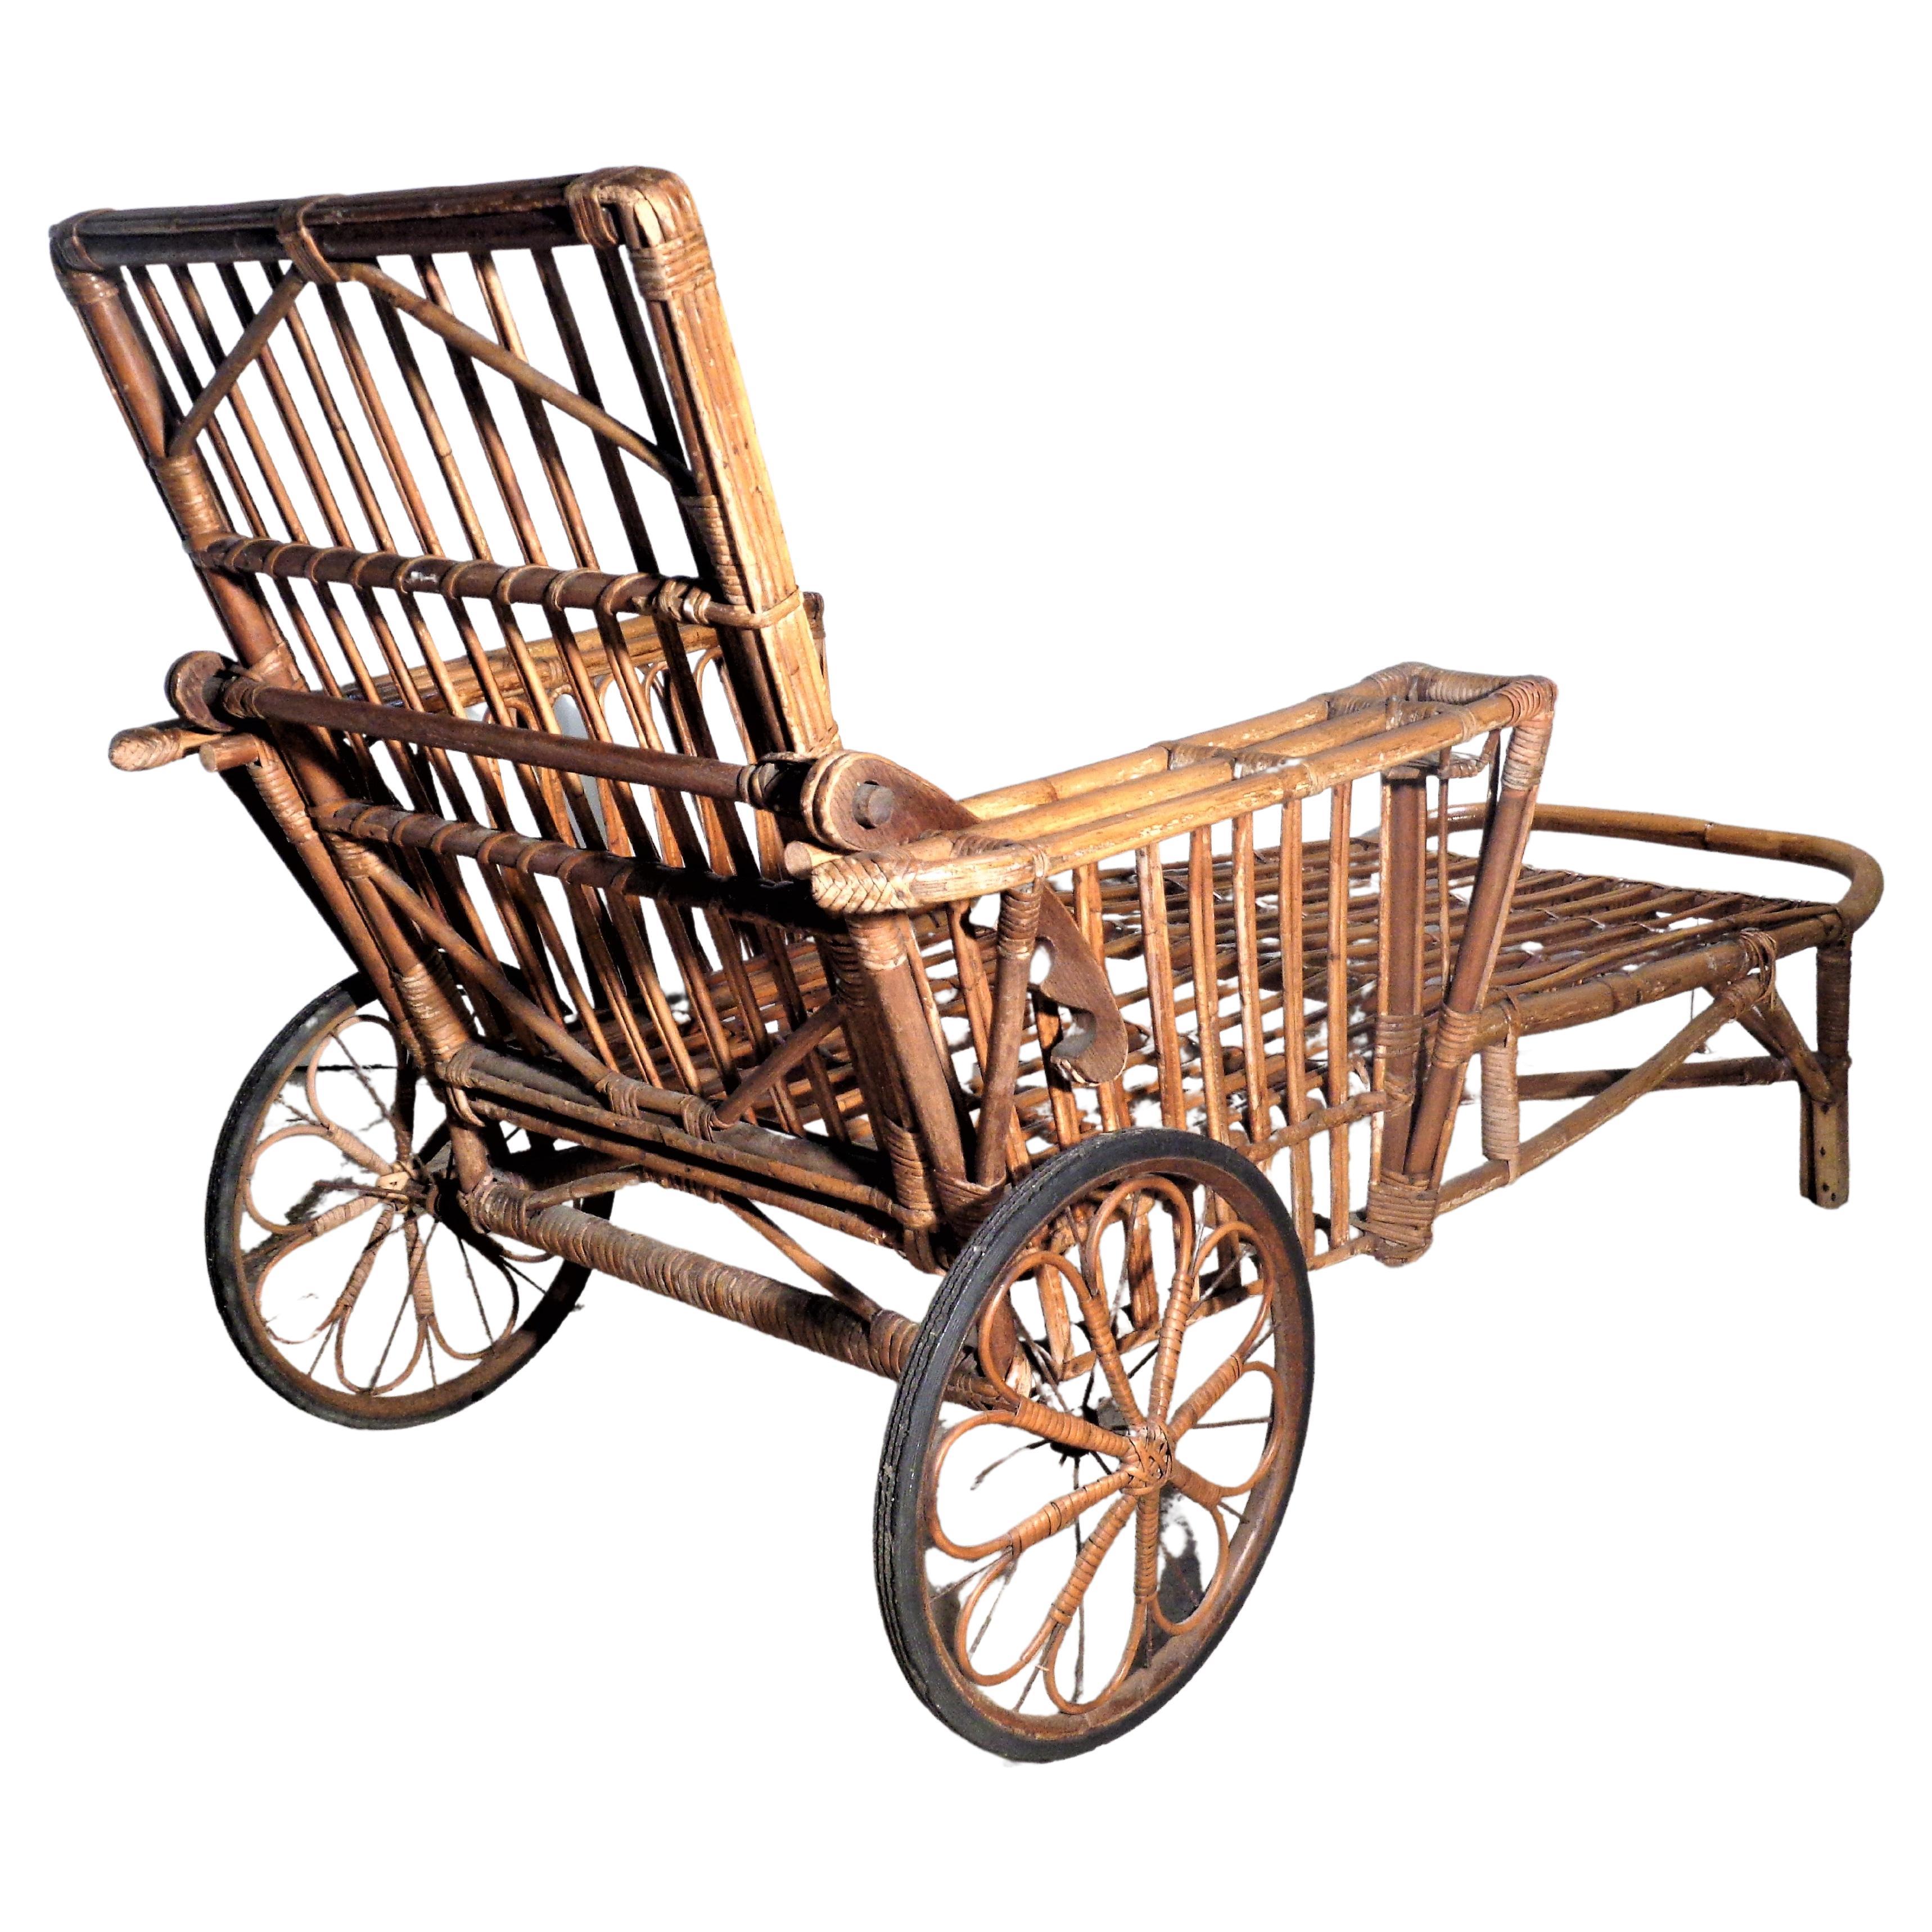  1930's American Stick Wicker Rattan Chaise Lounge For Sale 3